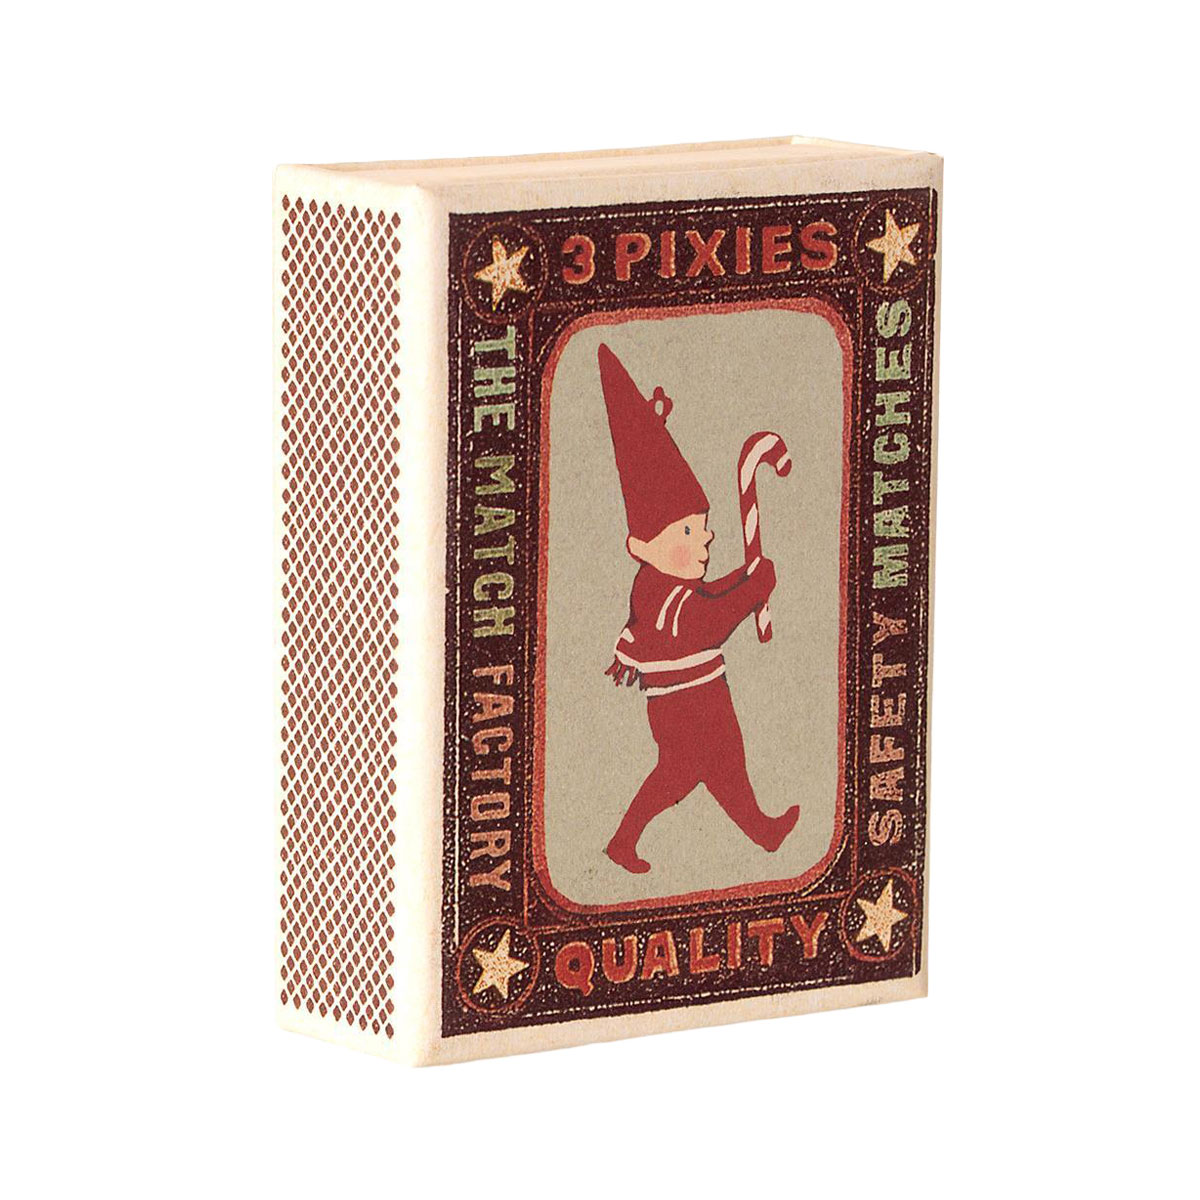 maileg christmas Ornaments 3 pixies in matchbox